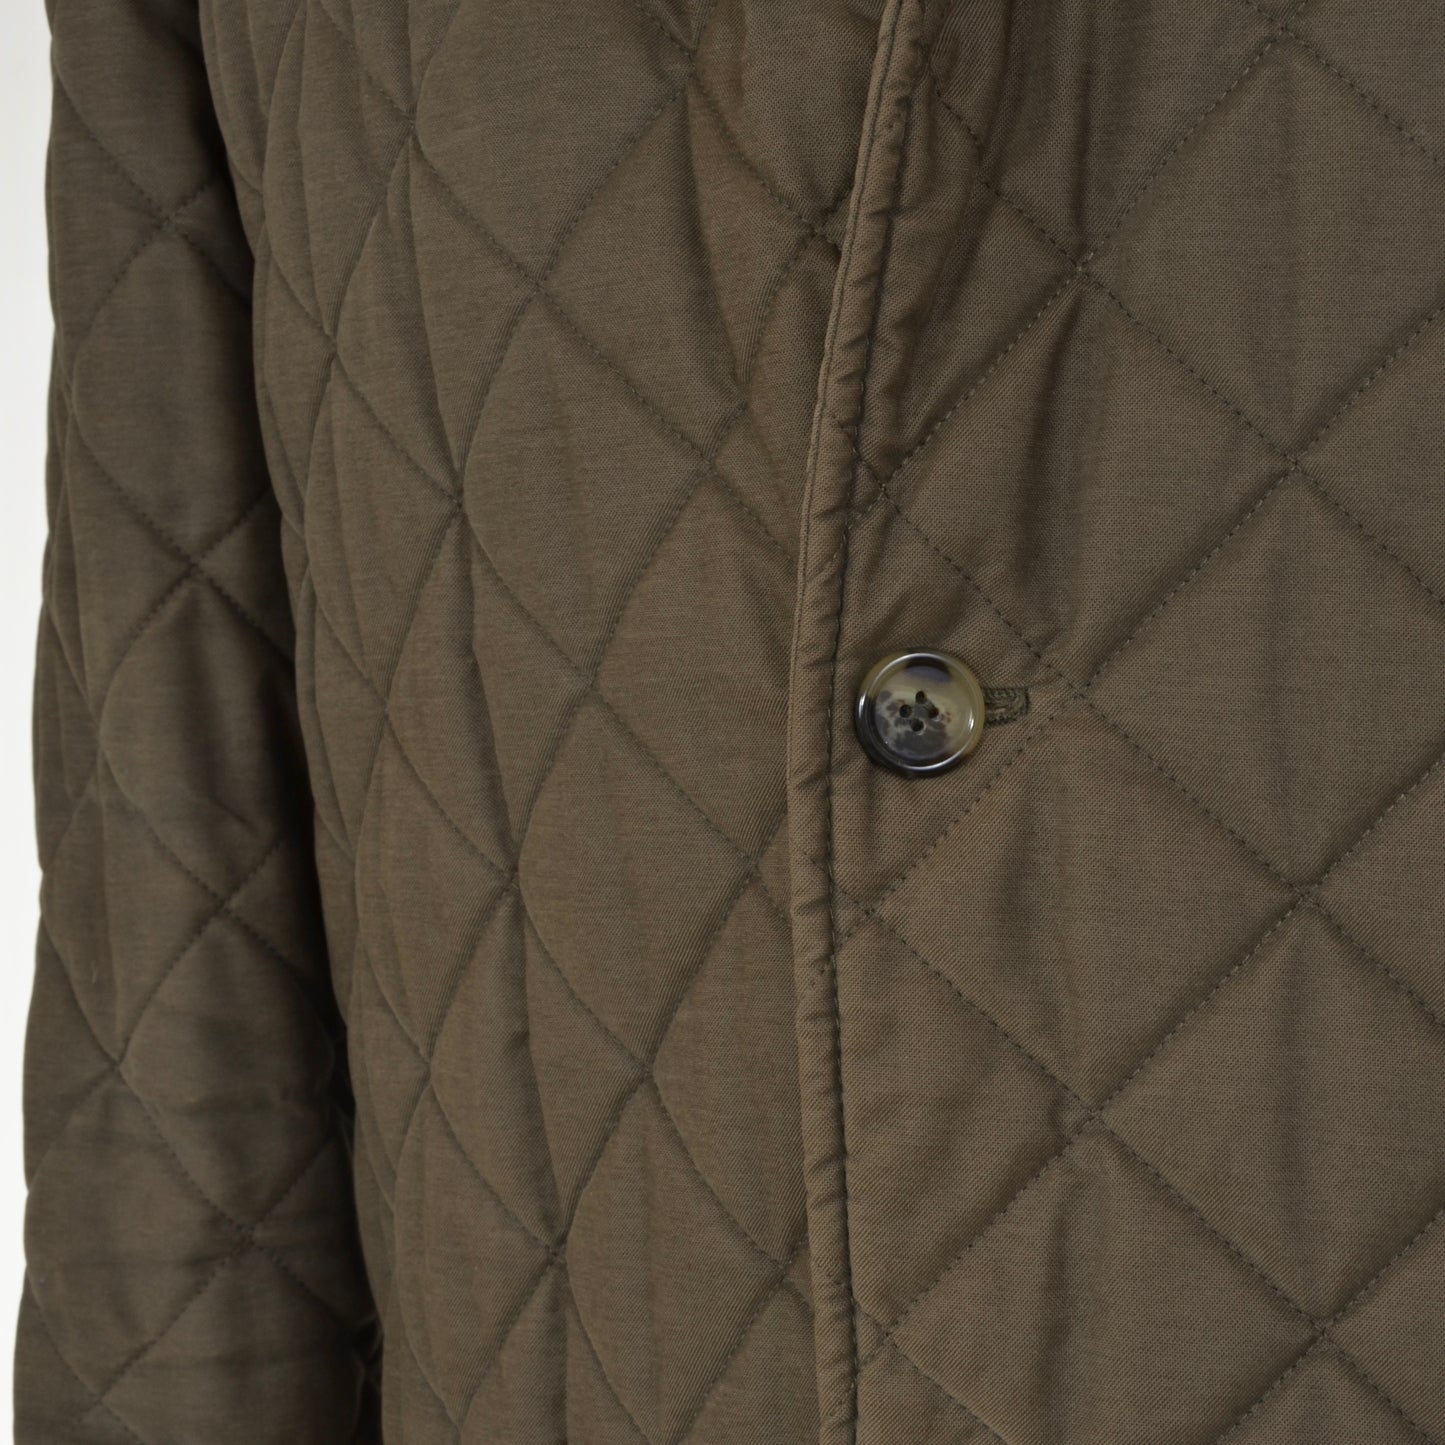 Ed Meier Quilted Jacket Size XXL - Olive